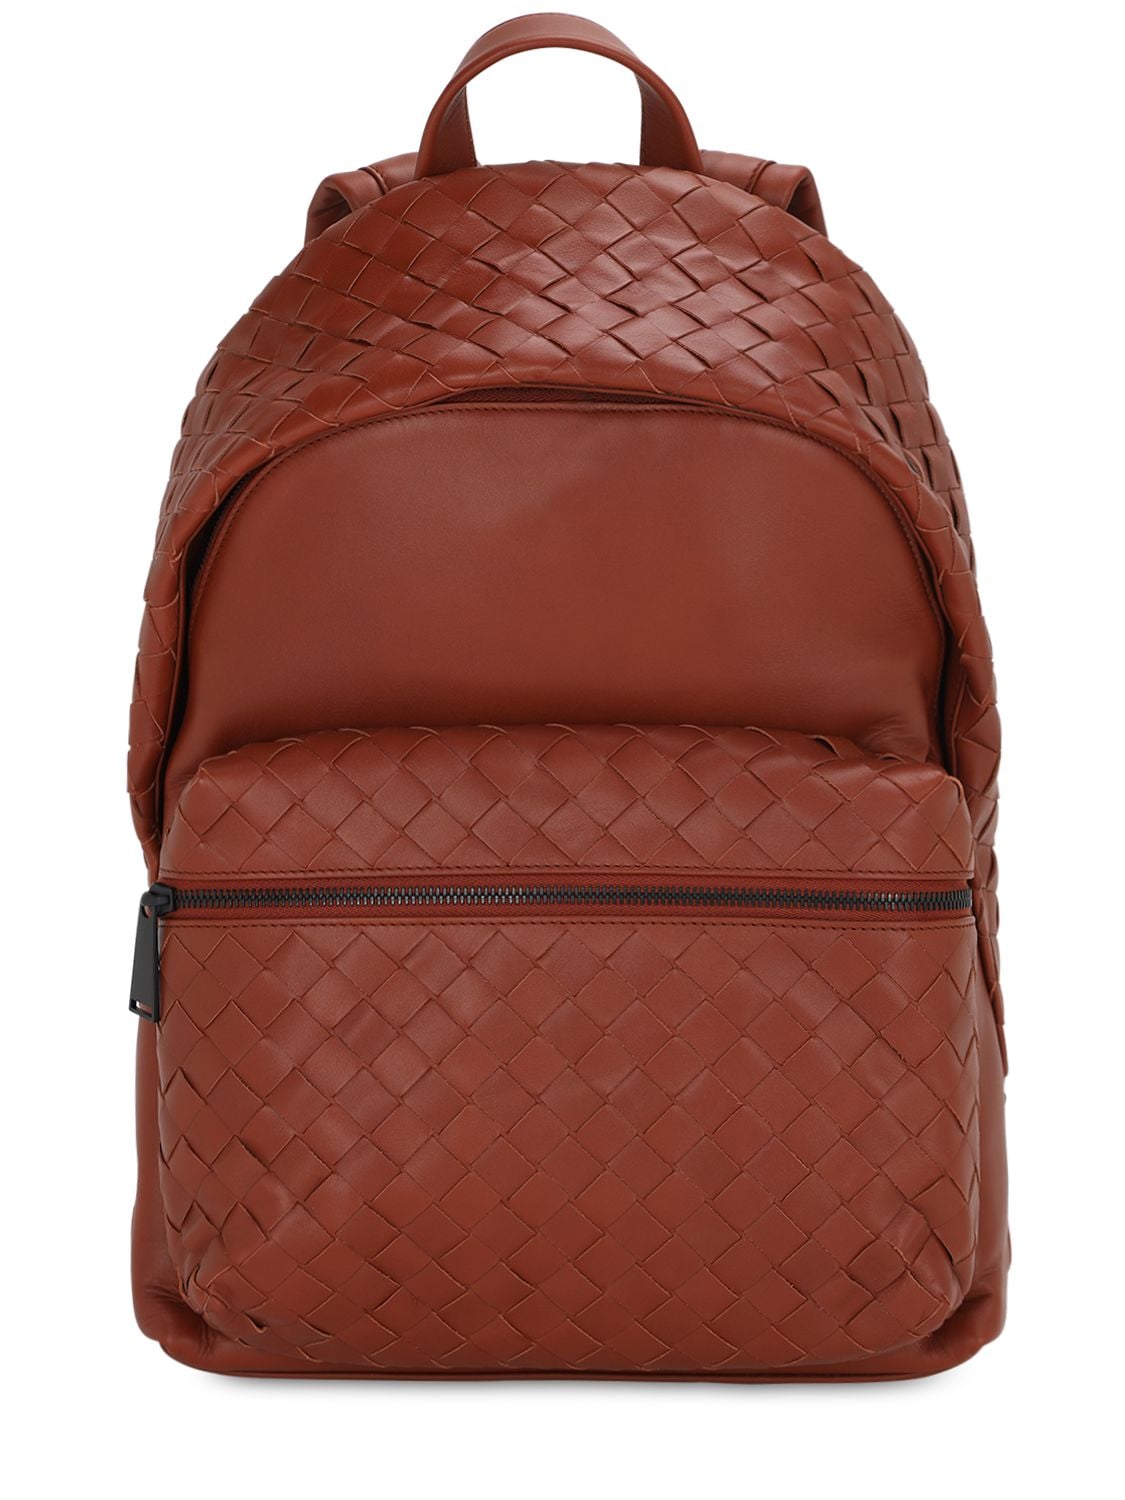 New Intrecciato Leather Backpack